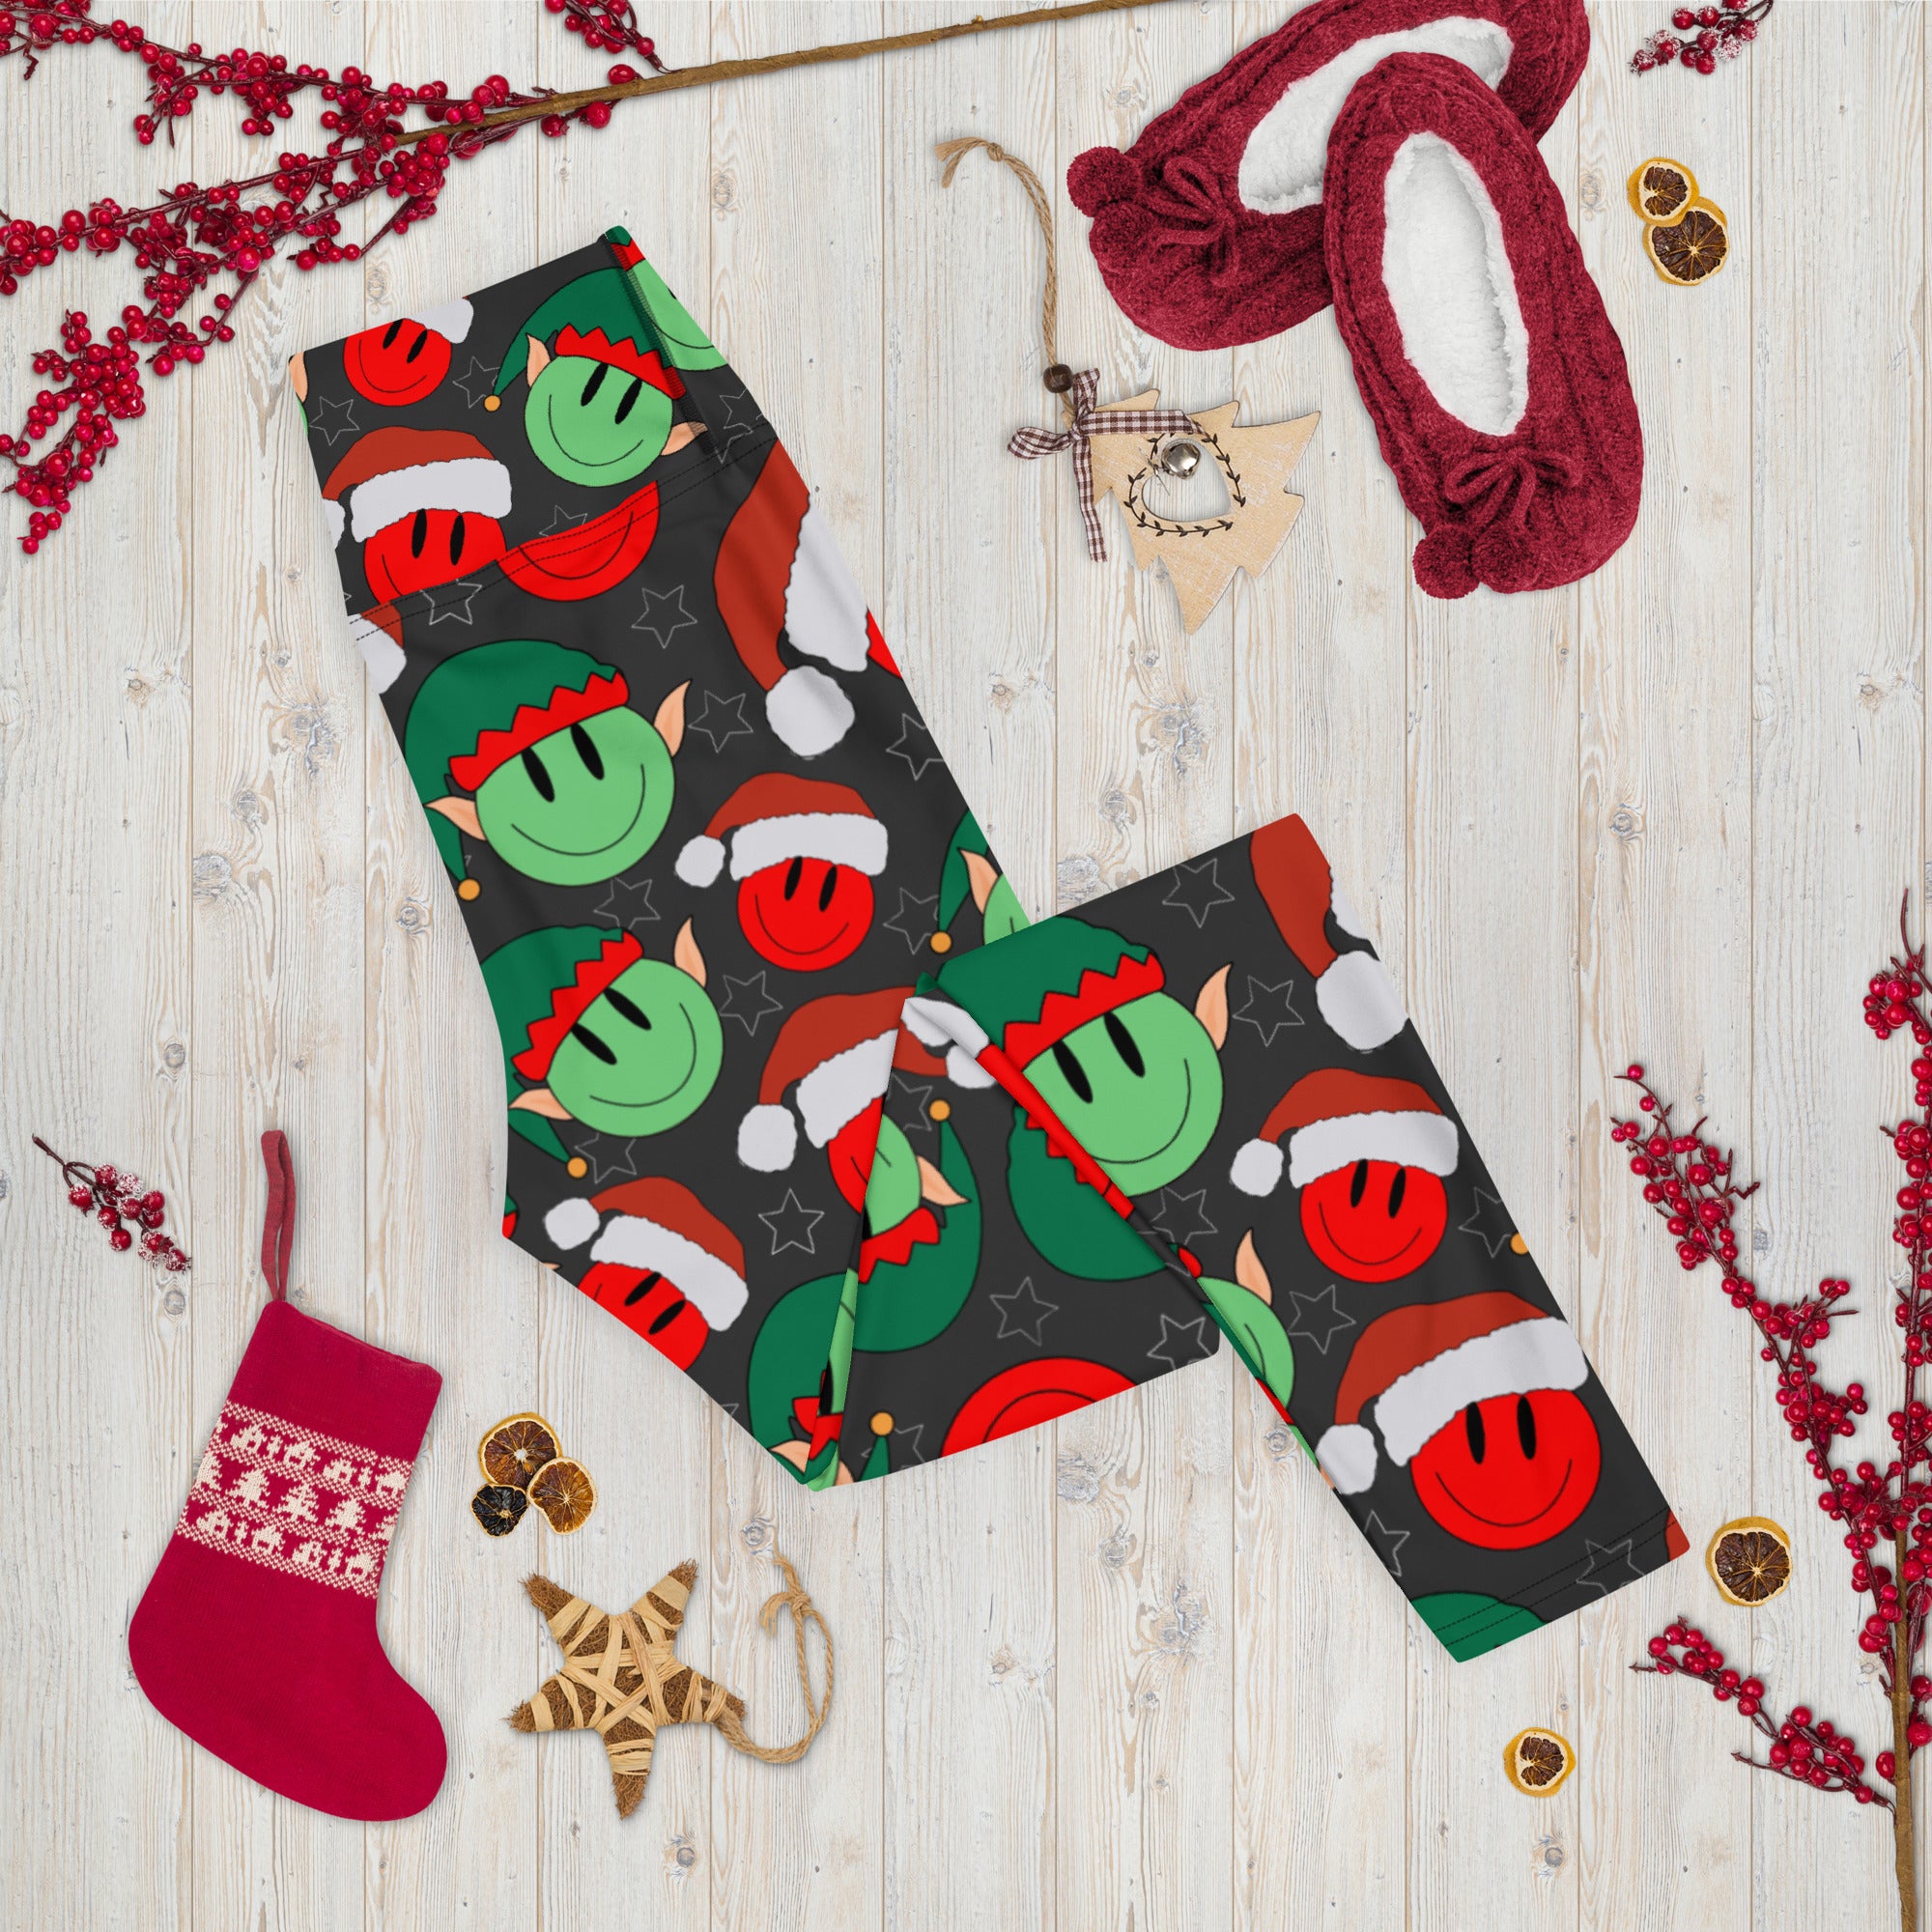 Elves And Smiley Faces Leggings